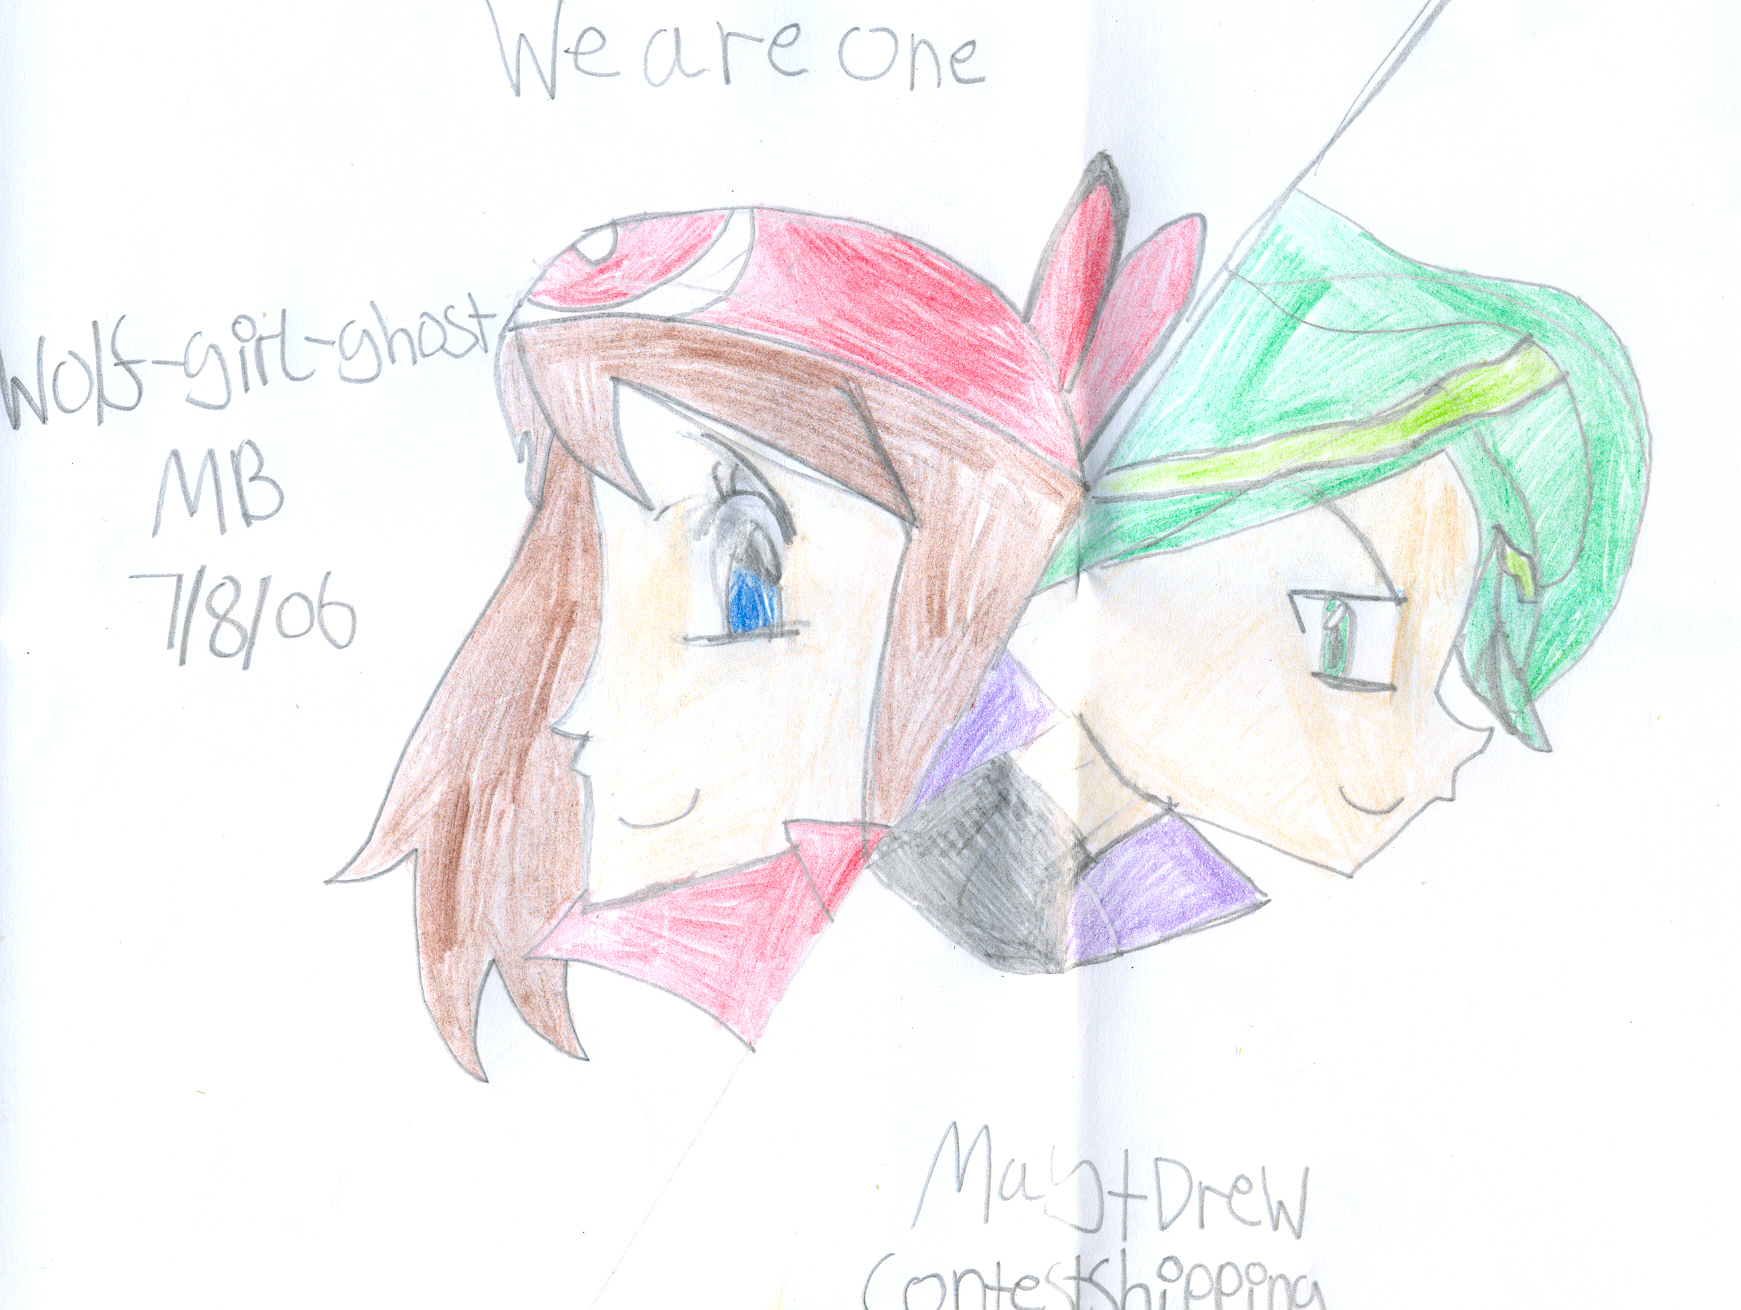 we are one(may+drew) by wolf-girl-ghost